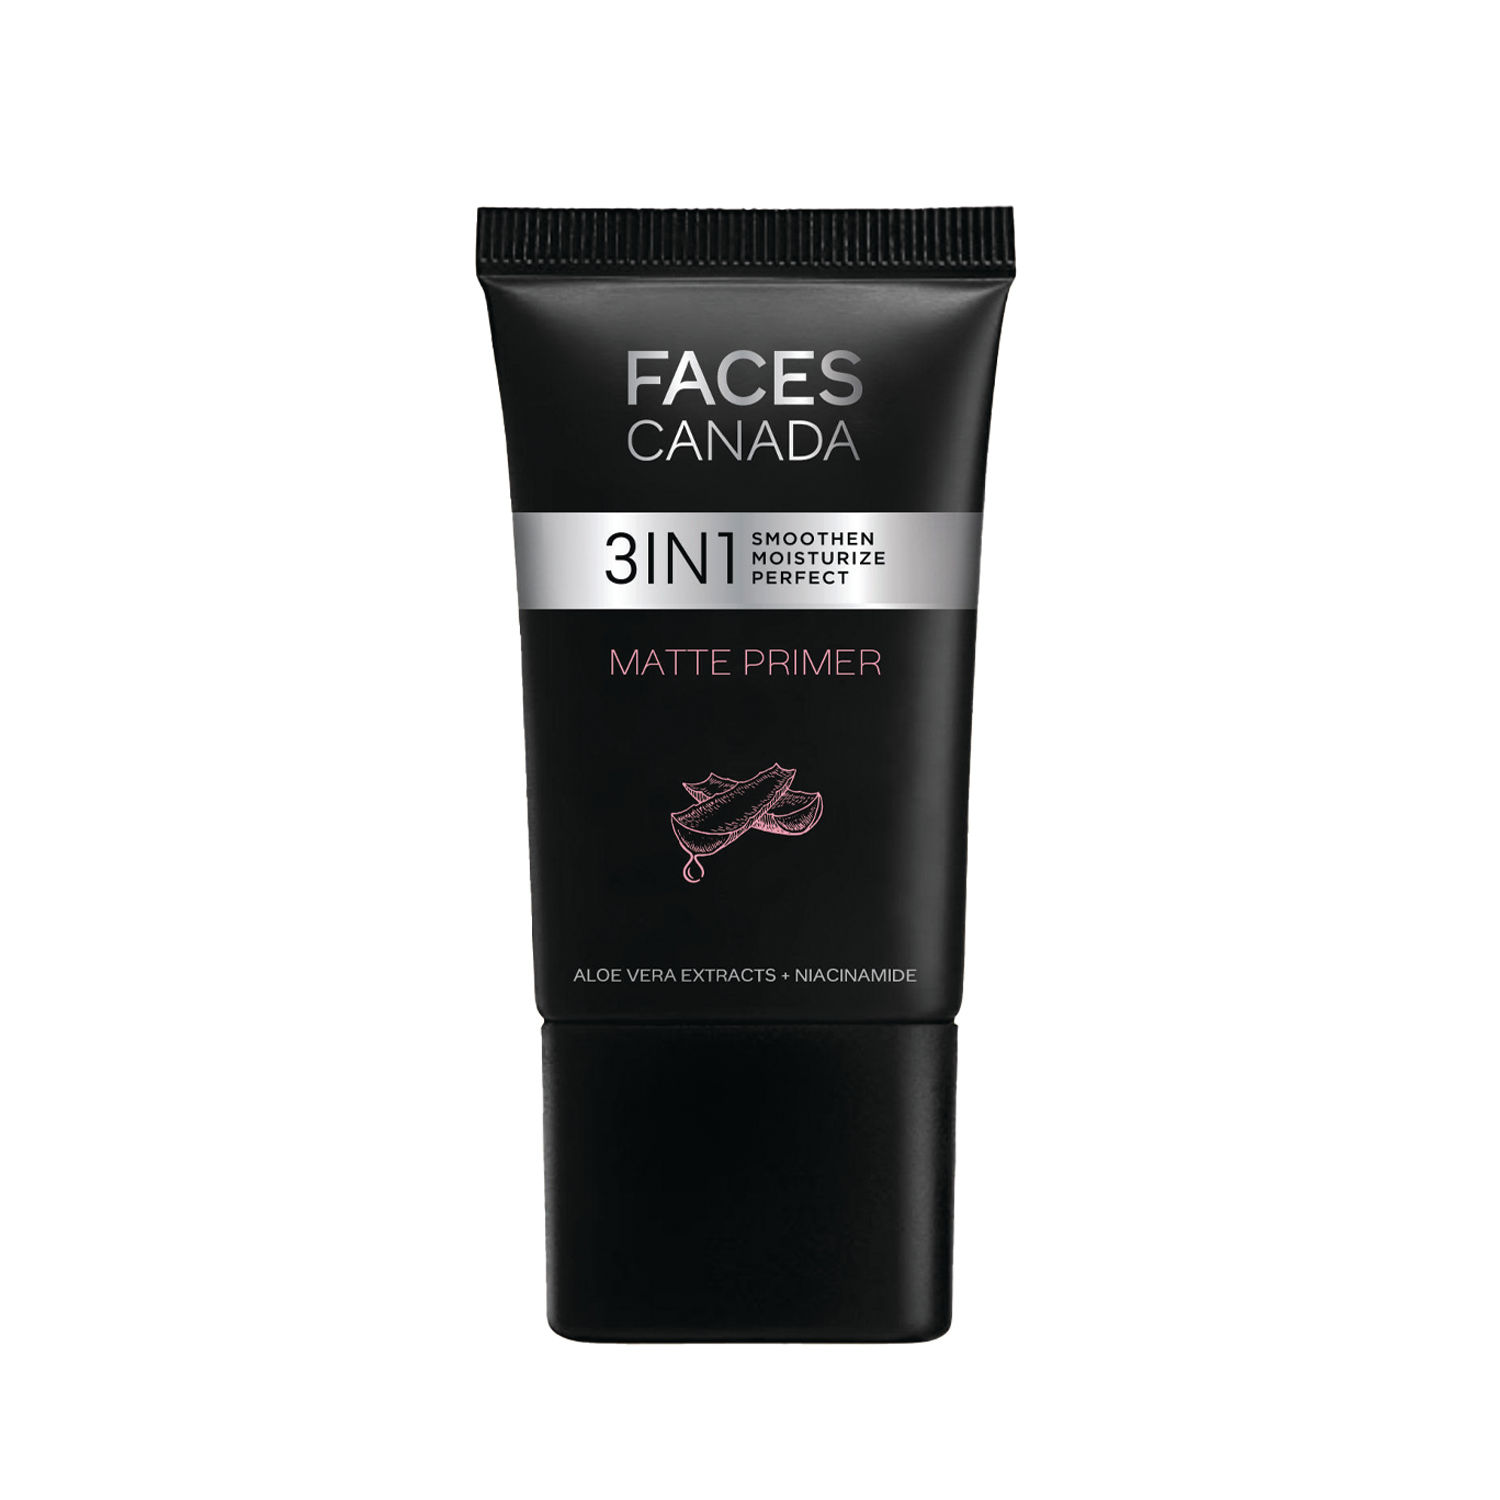 FACE PRIMERS, WHY ARE THEY SO POPULAR?